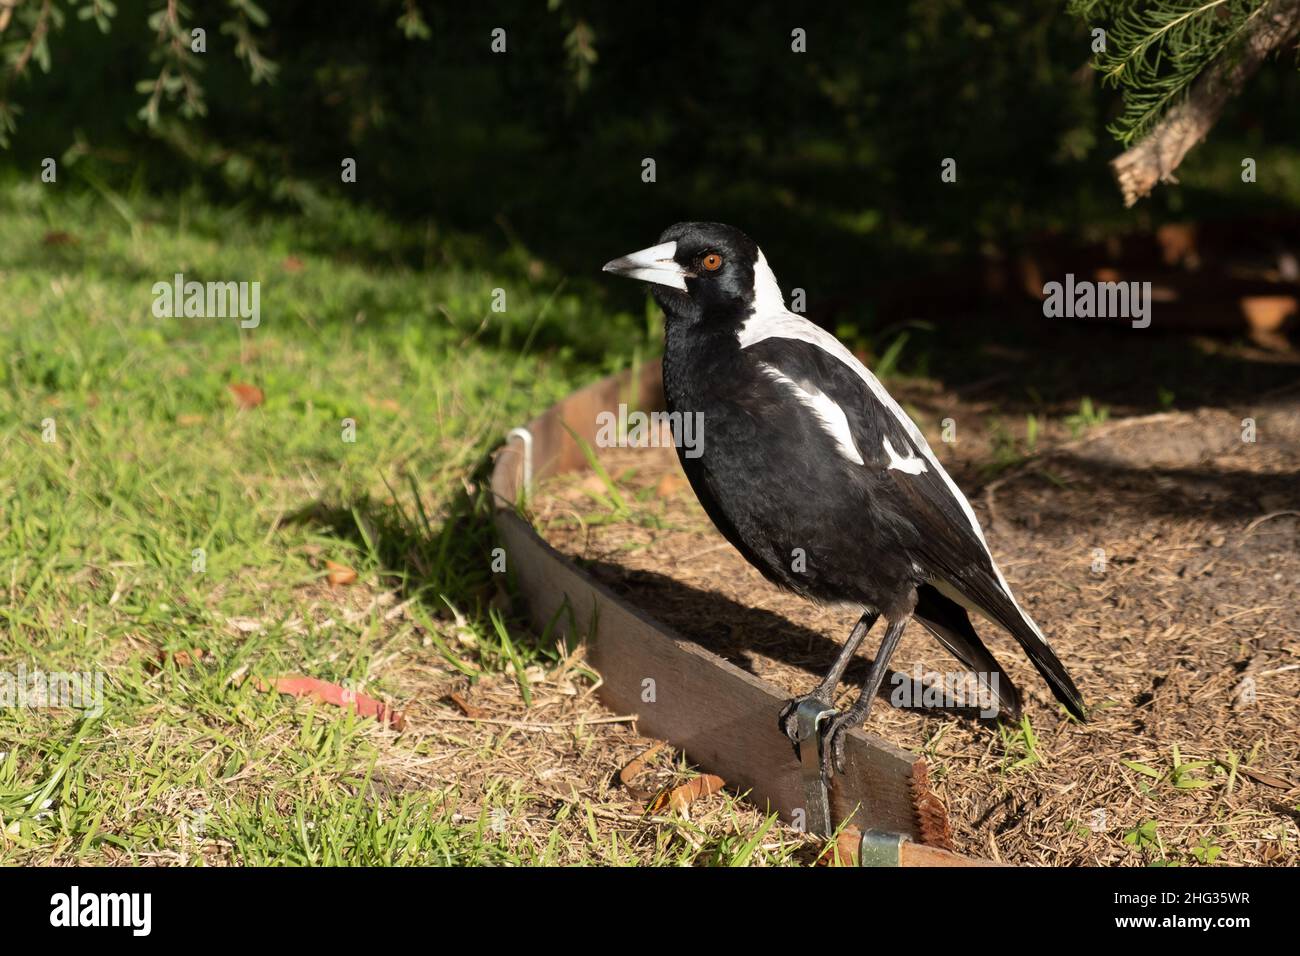 Australian magpie in the grass Stock Photo